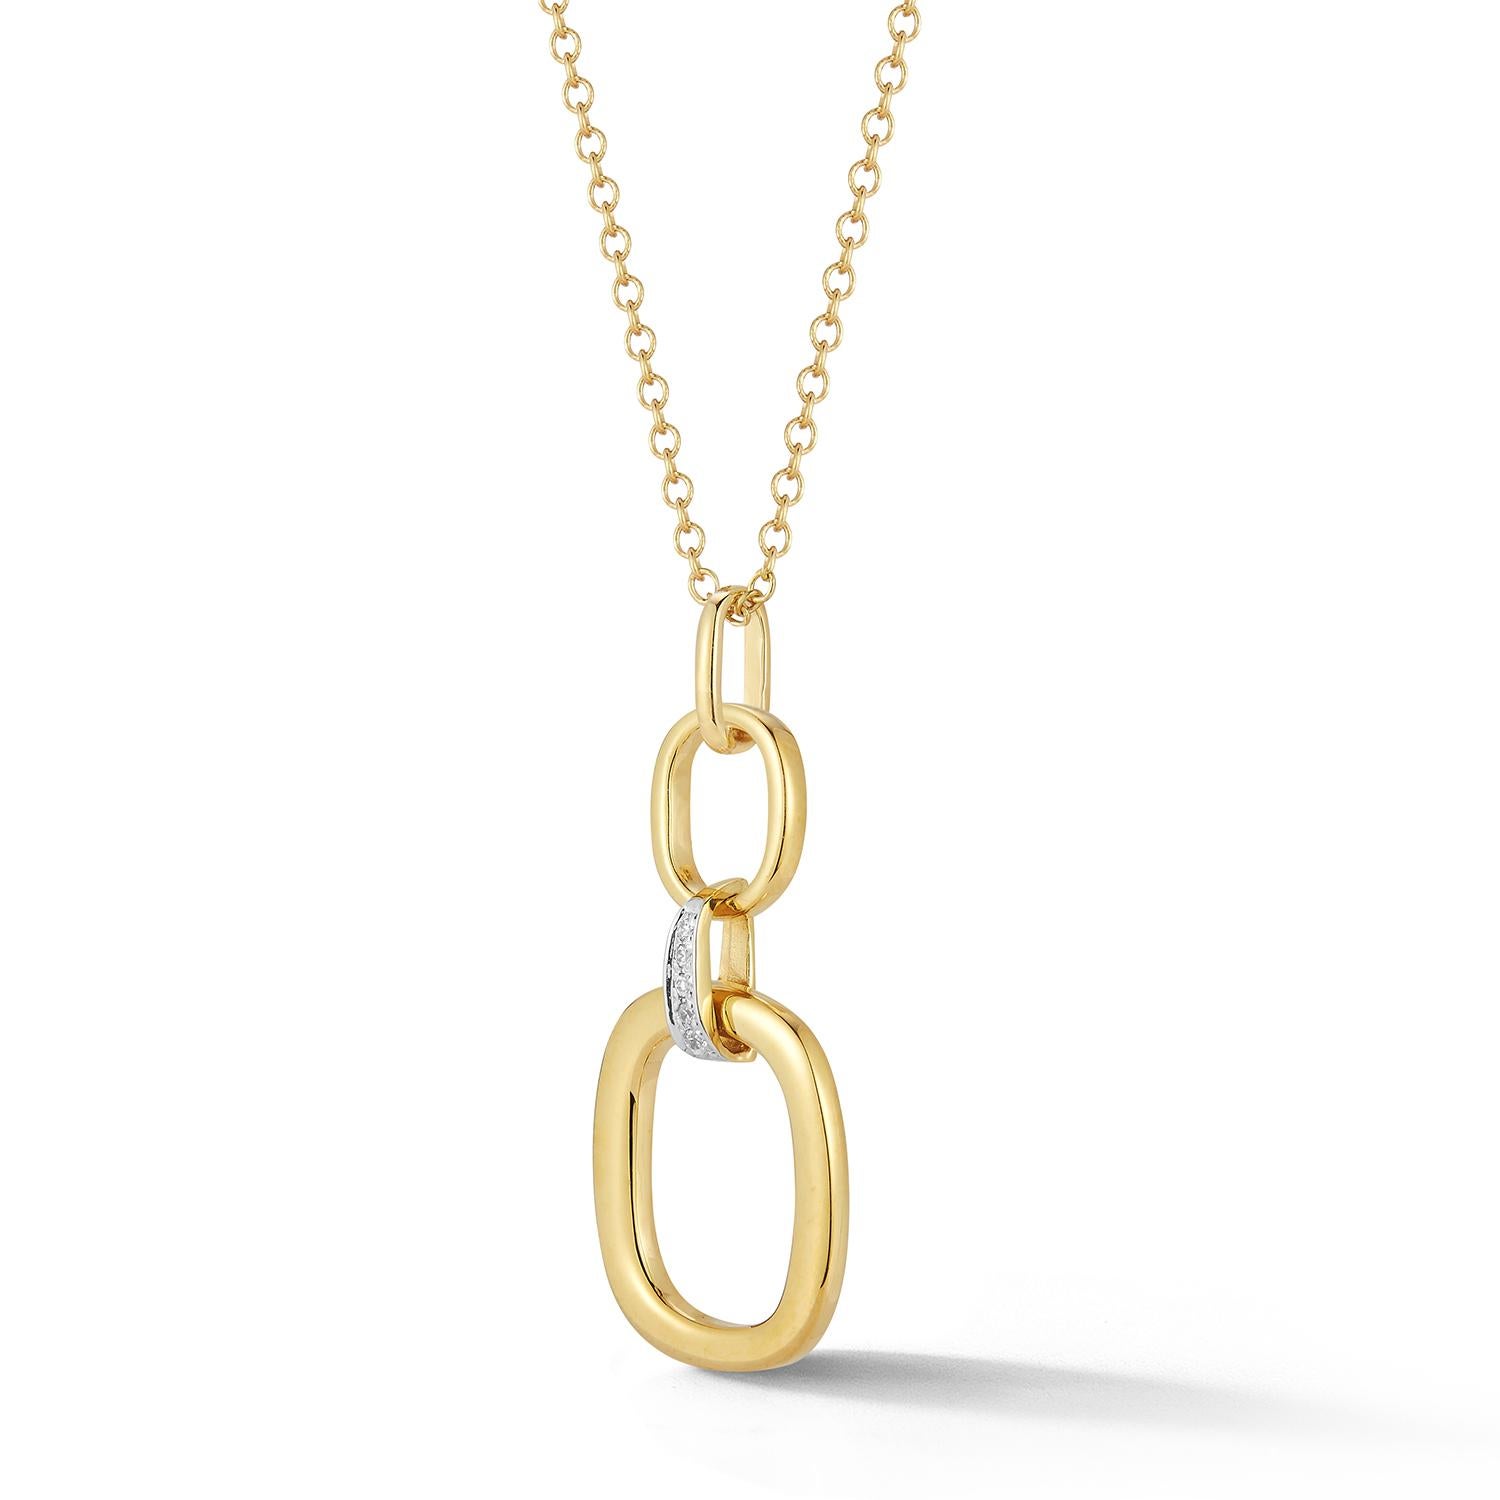 14 Karat Yellow Gold Hand-Crafted High Polish-Finished Graduating Open-Form Drop Pendant, Accented with 0.05 Carats of a Pave Set Diamond Connecting Bar, Sliding on a 16